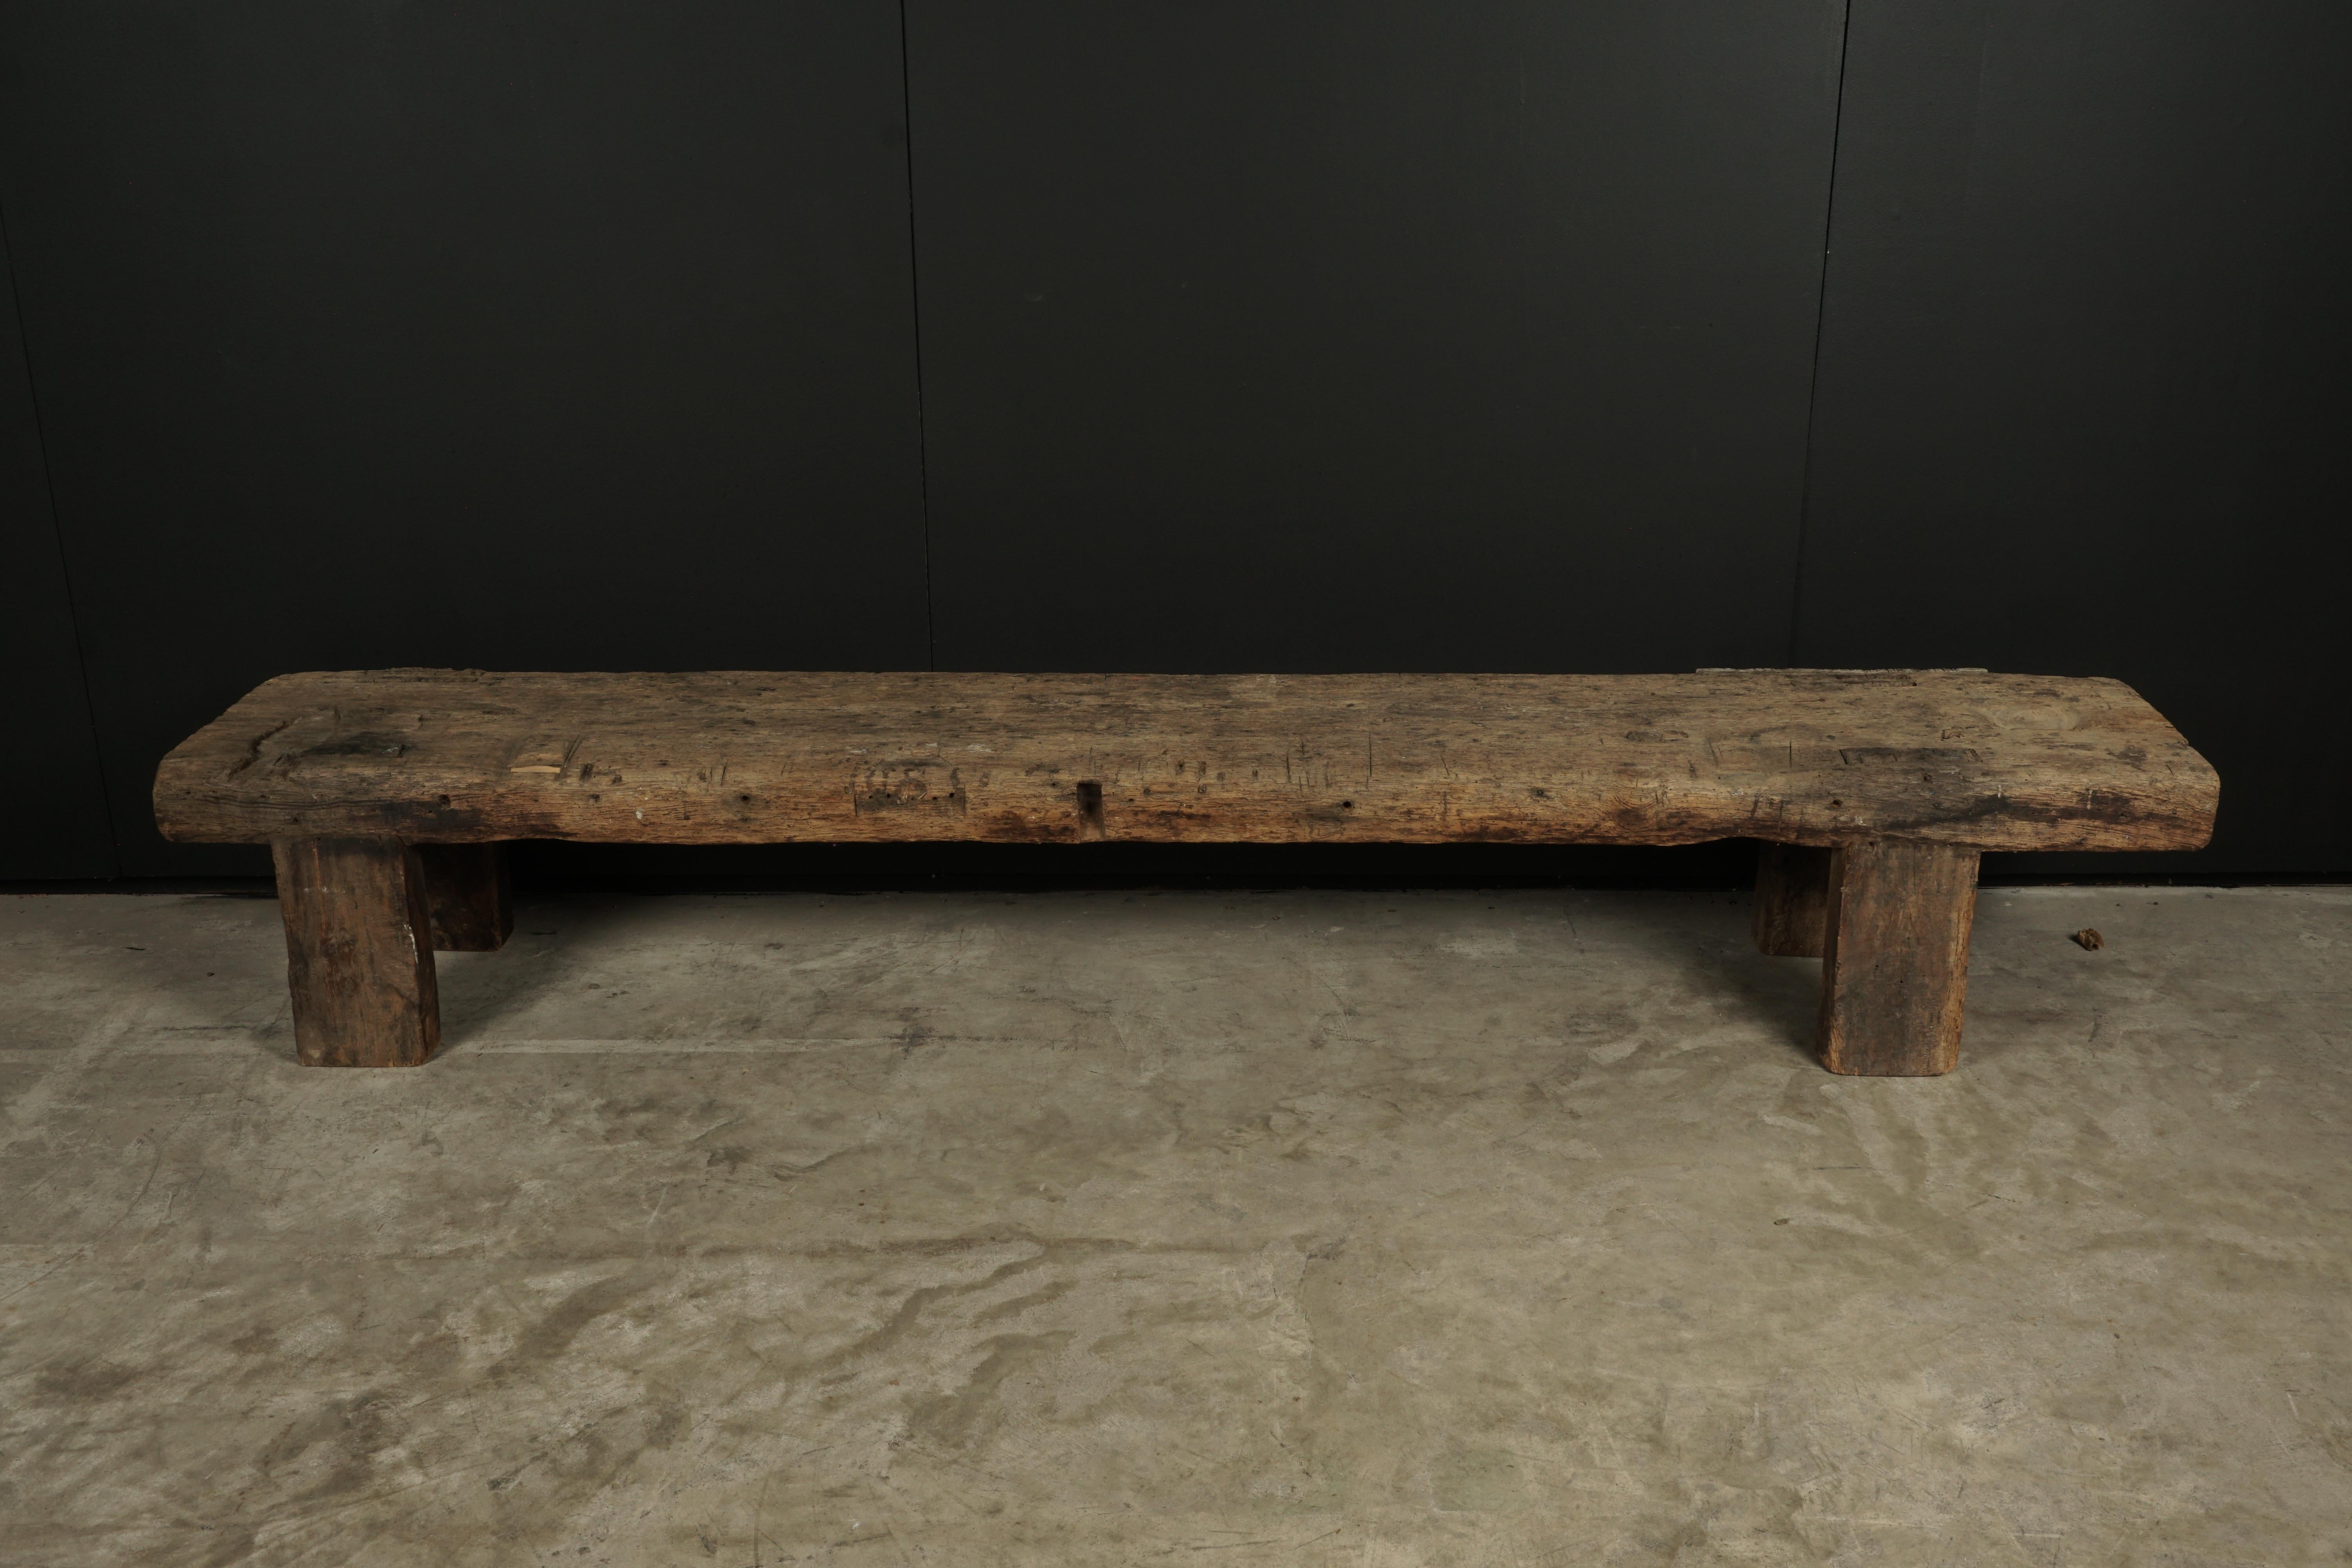 Primitive pine coffee table from France, circa 1920. Heavy solid pine construction with very great wear and patina.